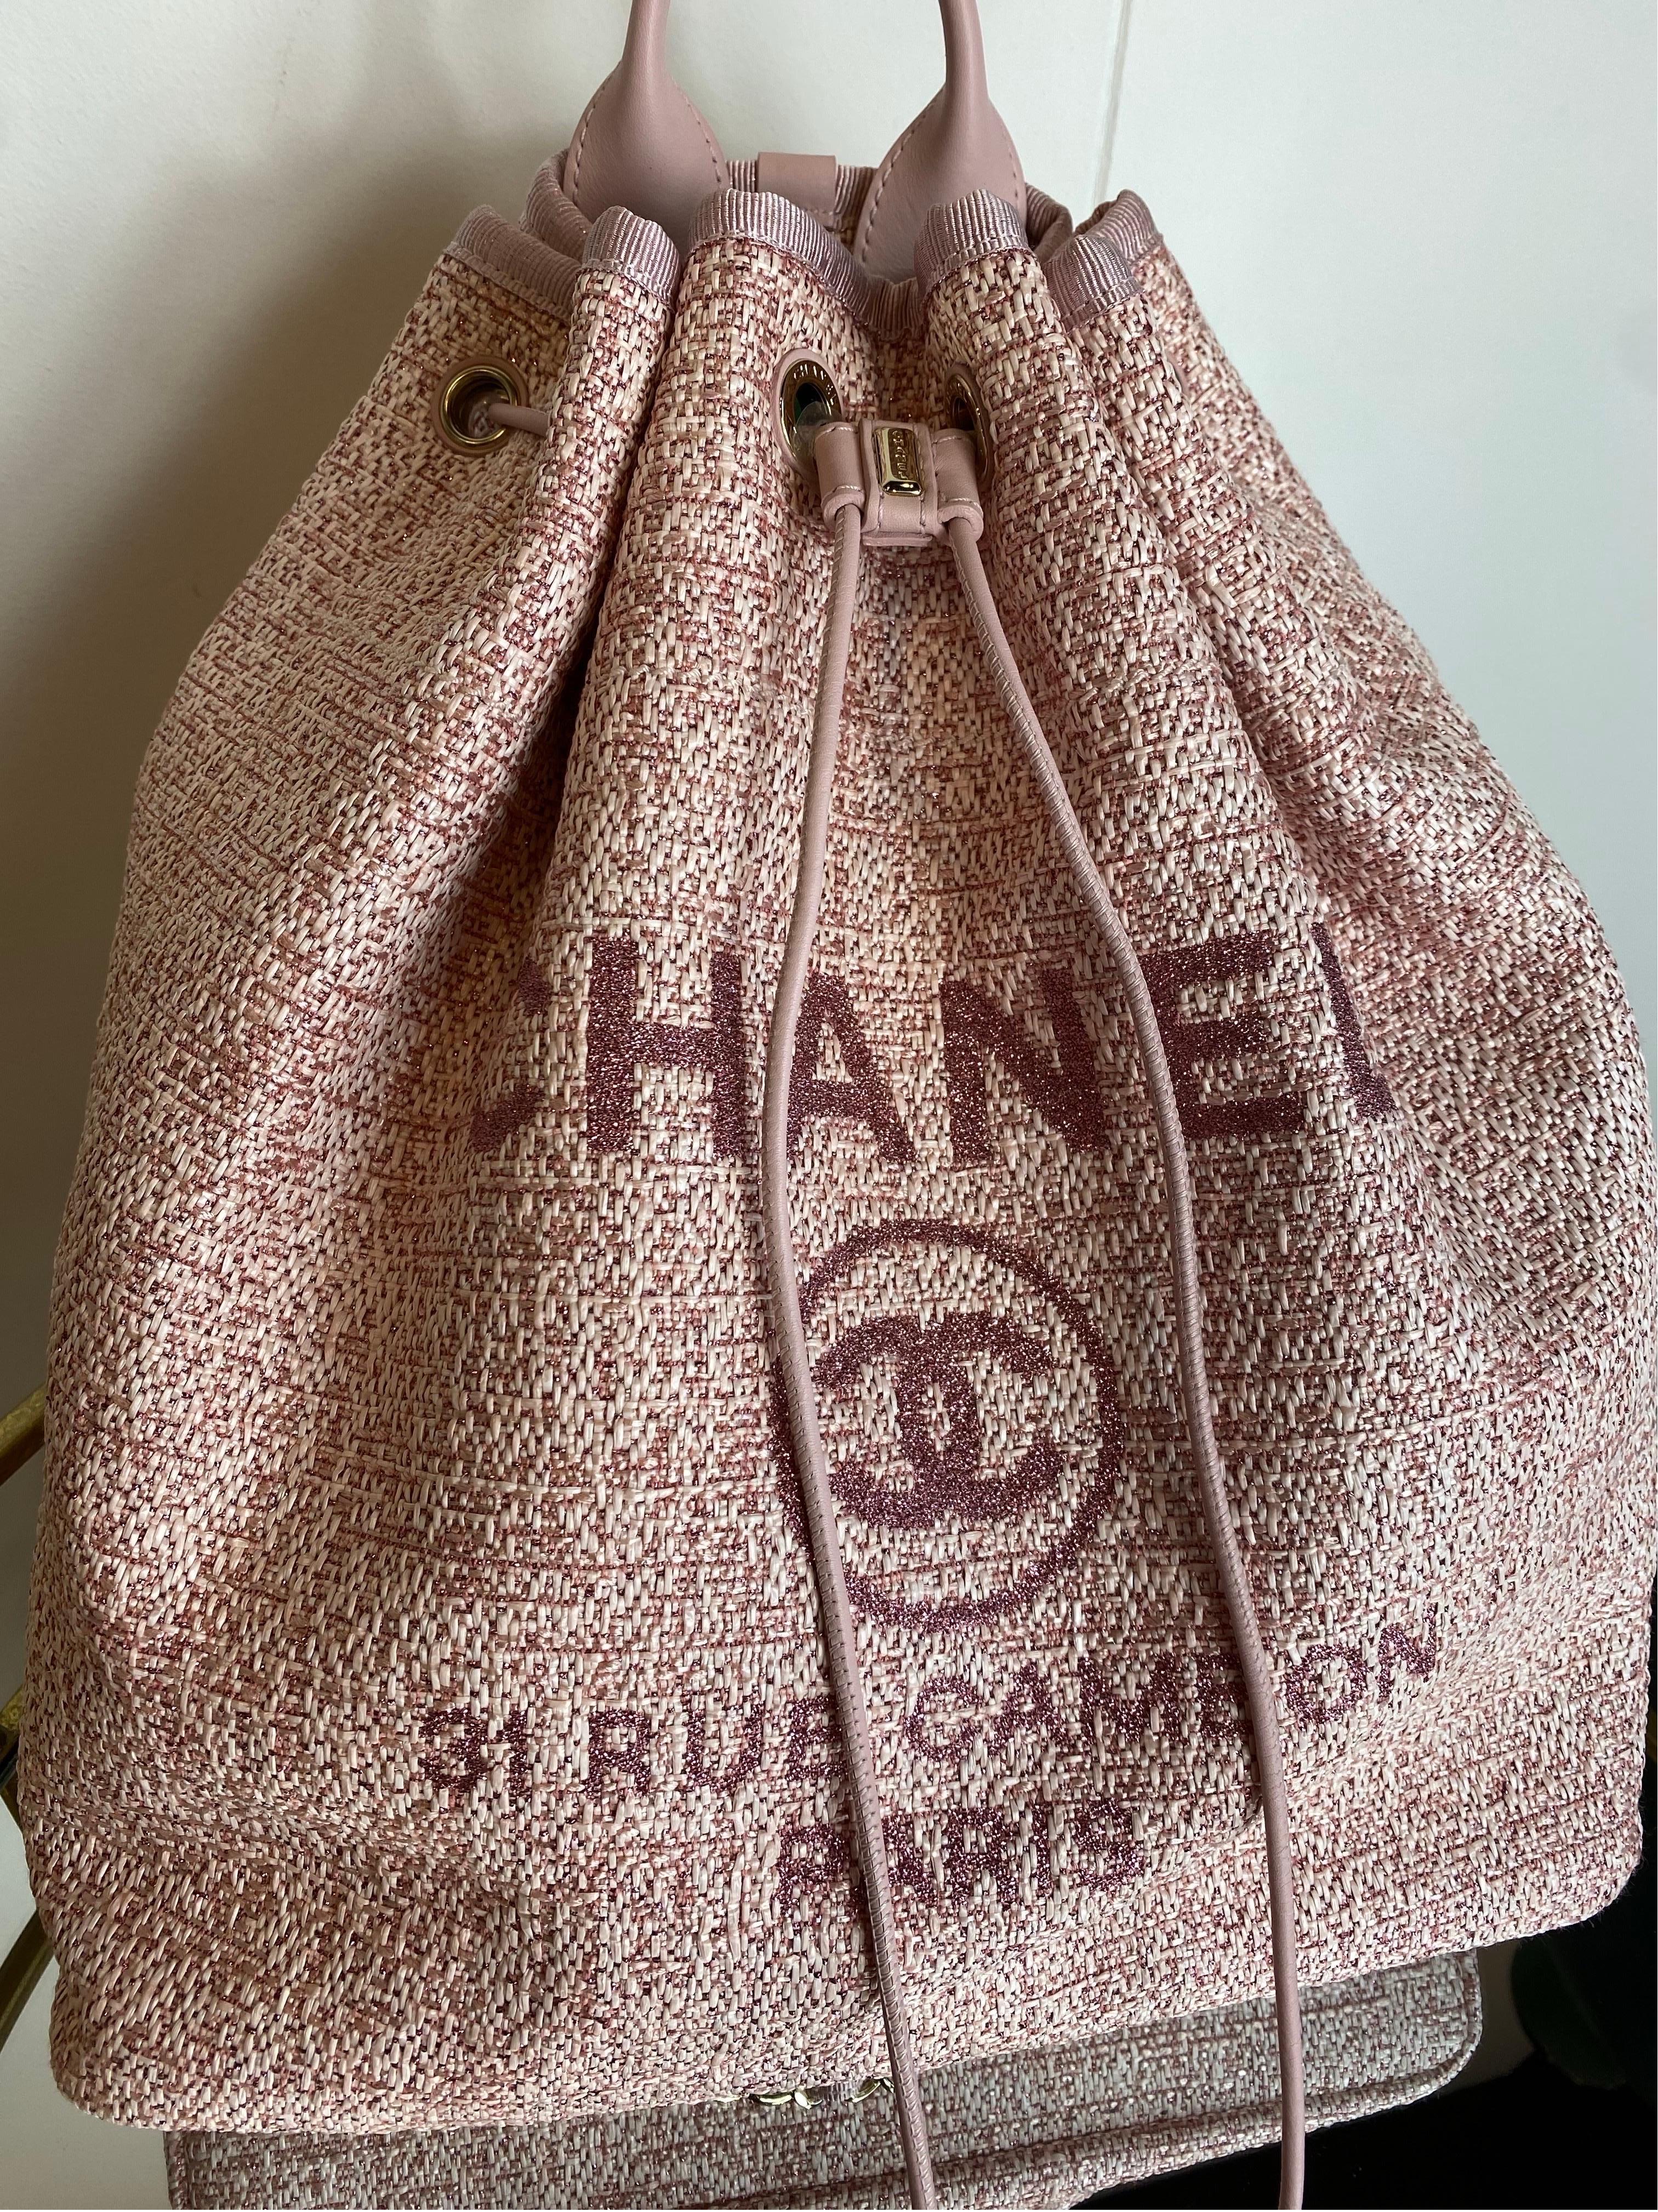 Women's or Men's Chanel Deauville pink tweed Backpack  For Sale